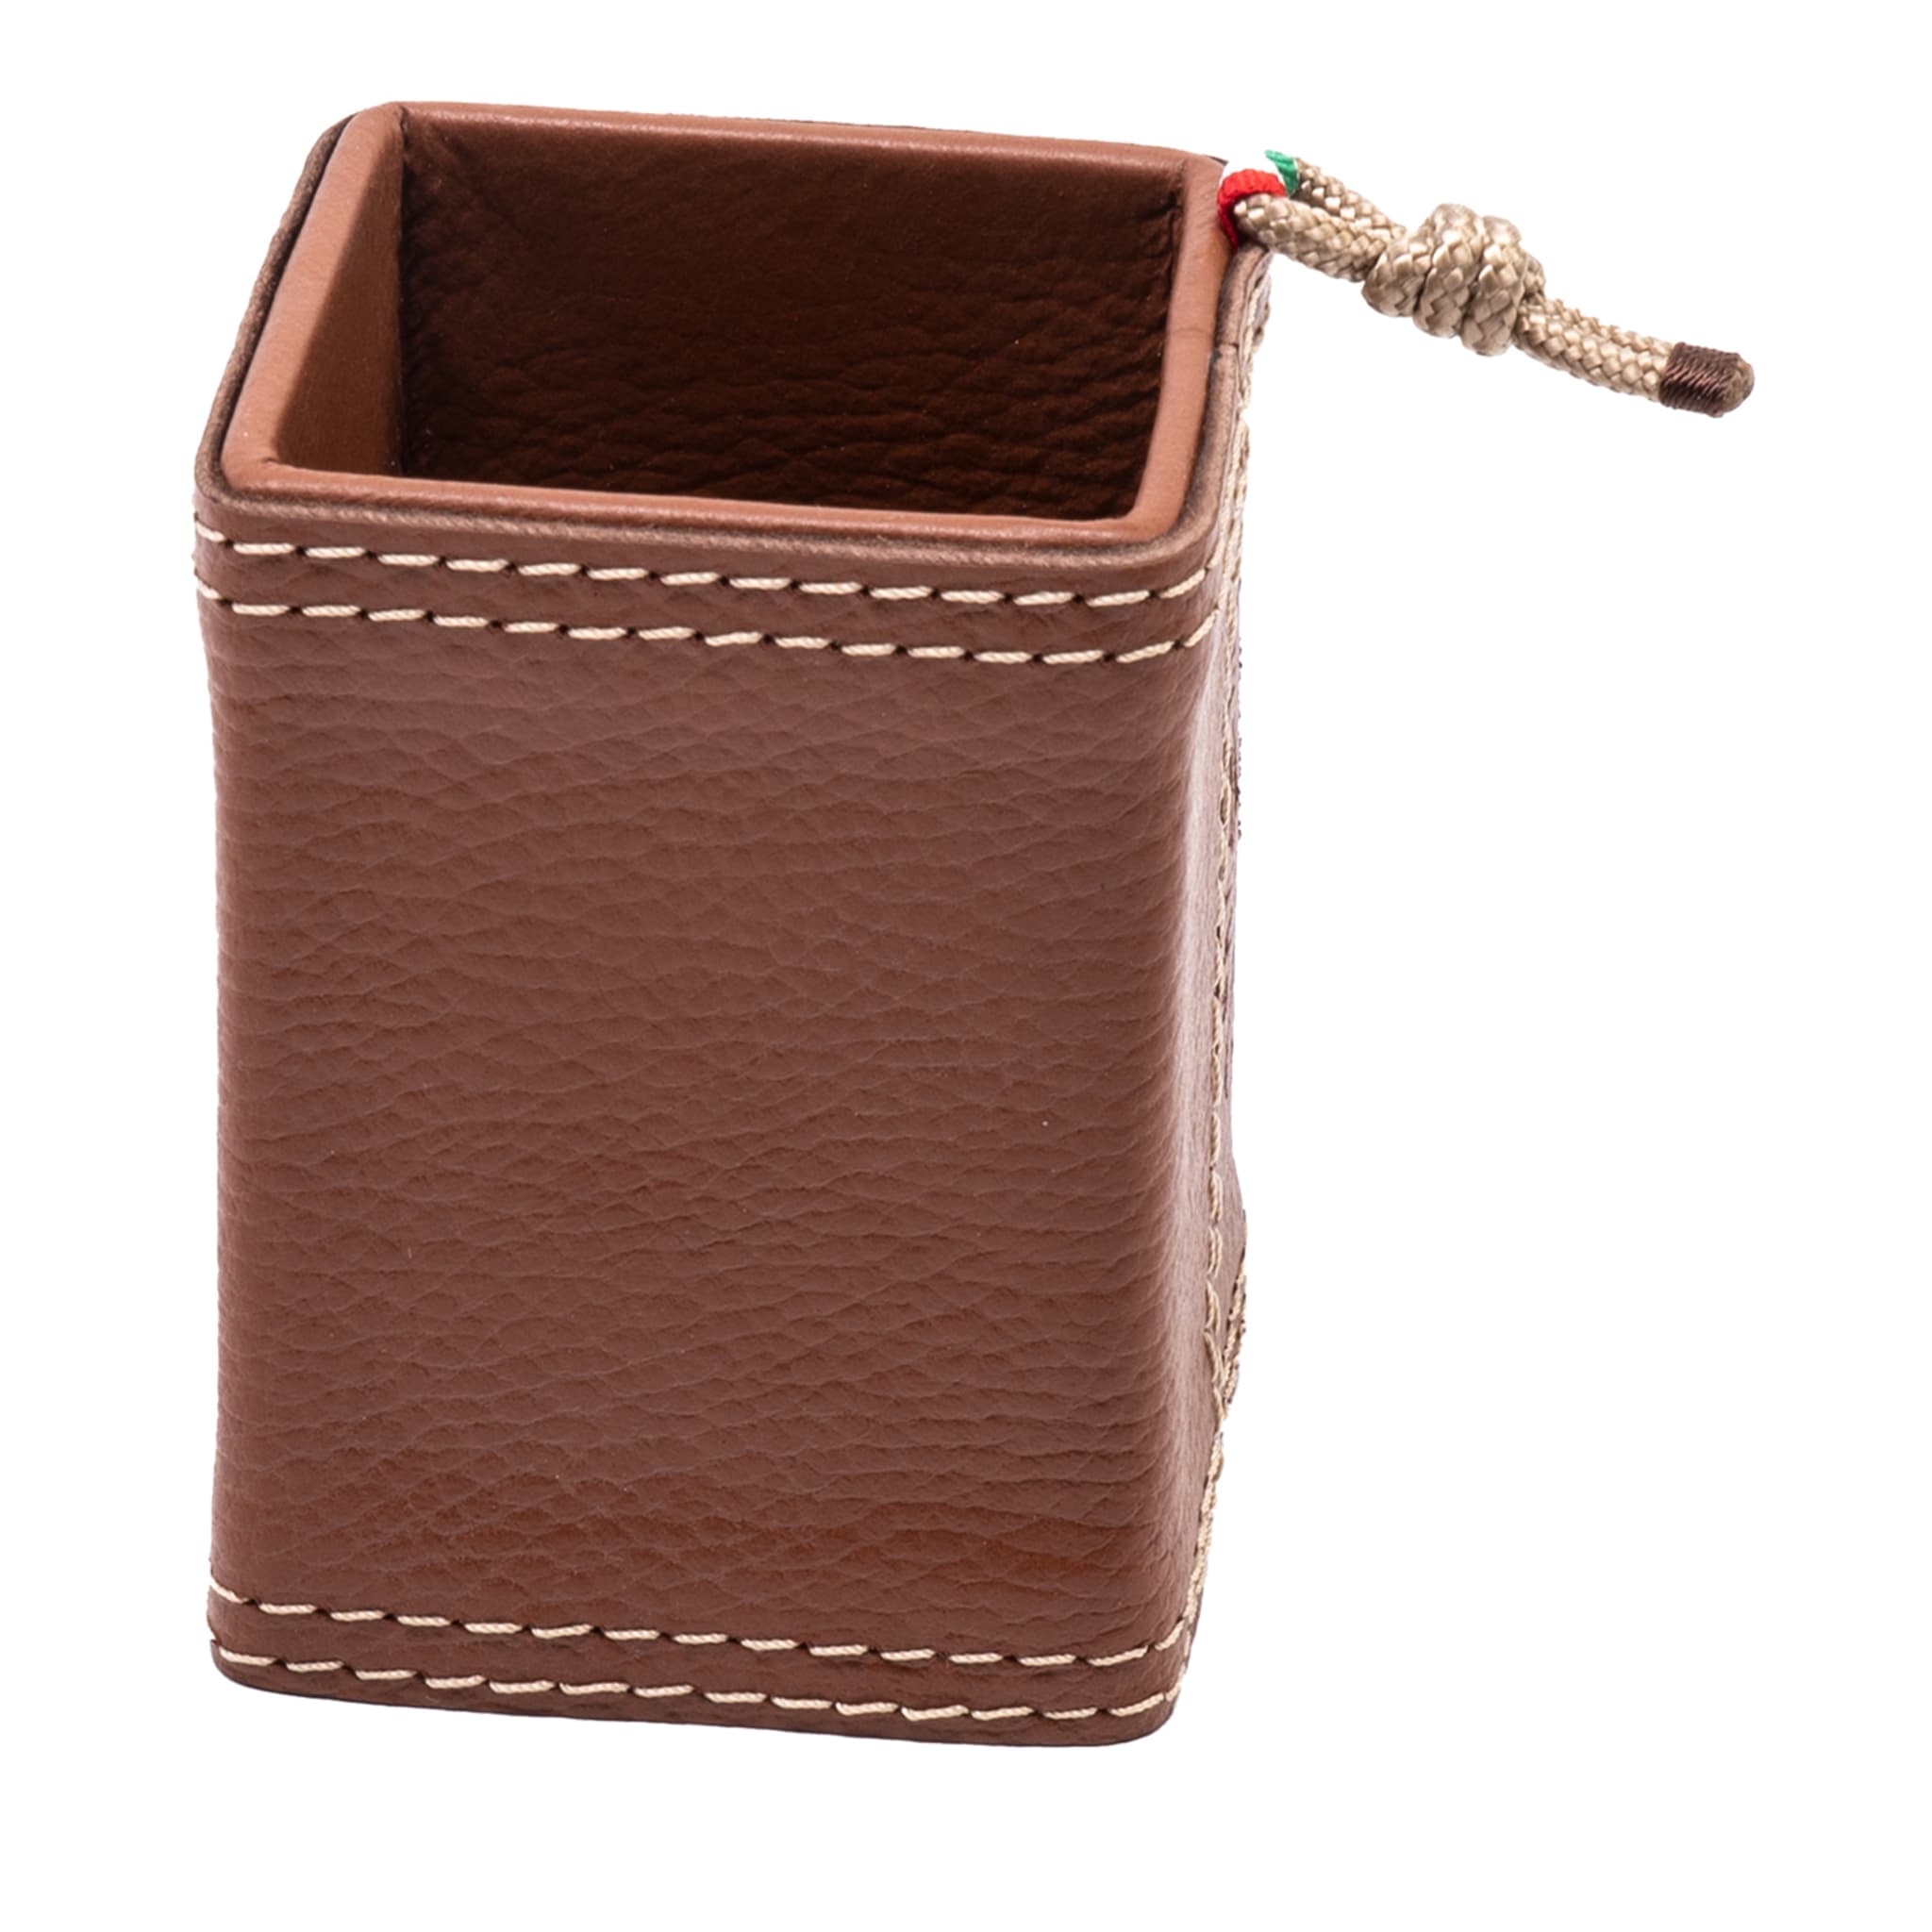 Beige Eco-Leather Pen Holder with Rope Insert Marricreo